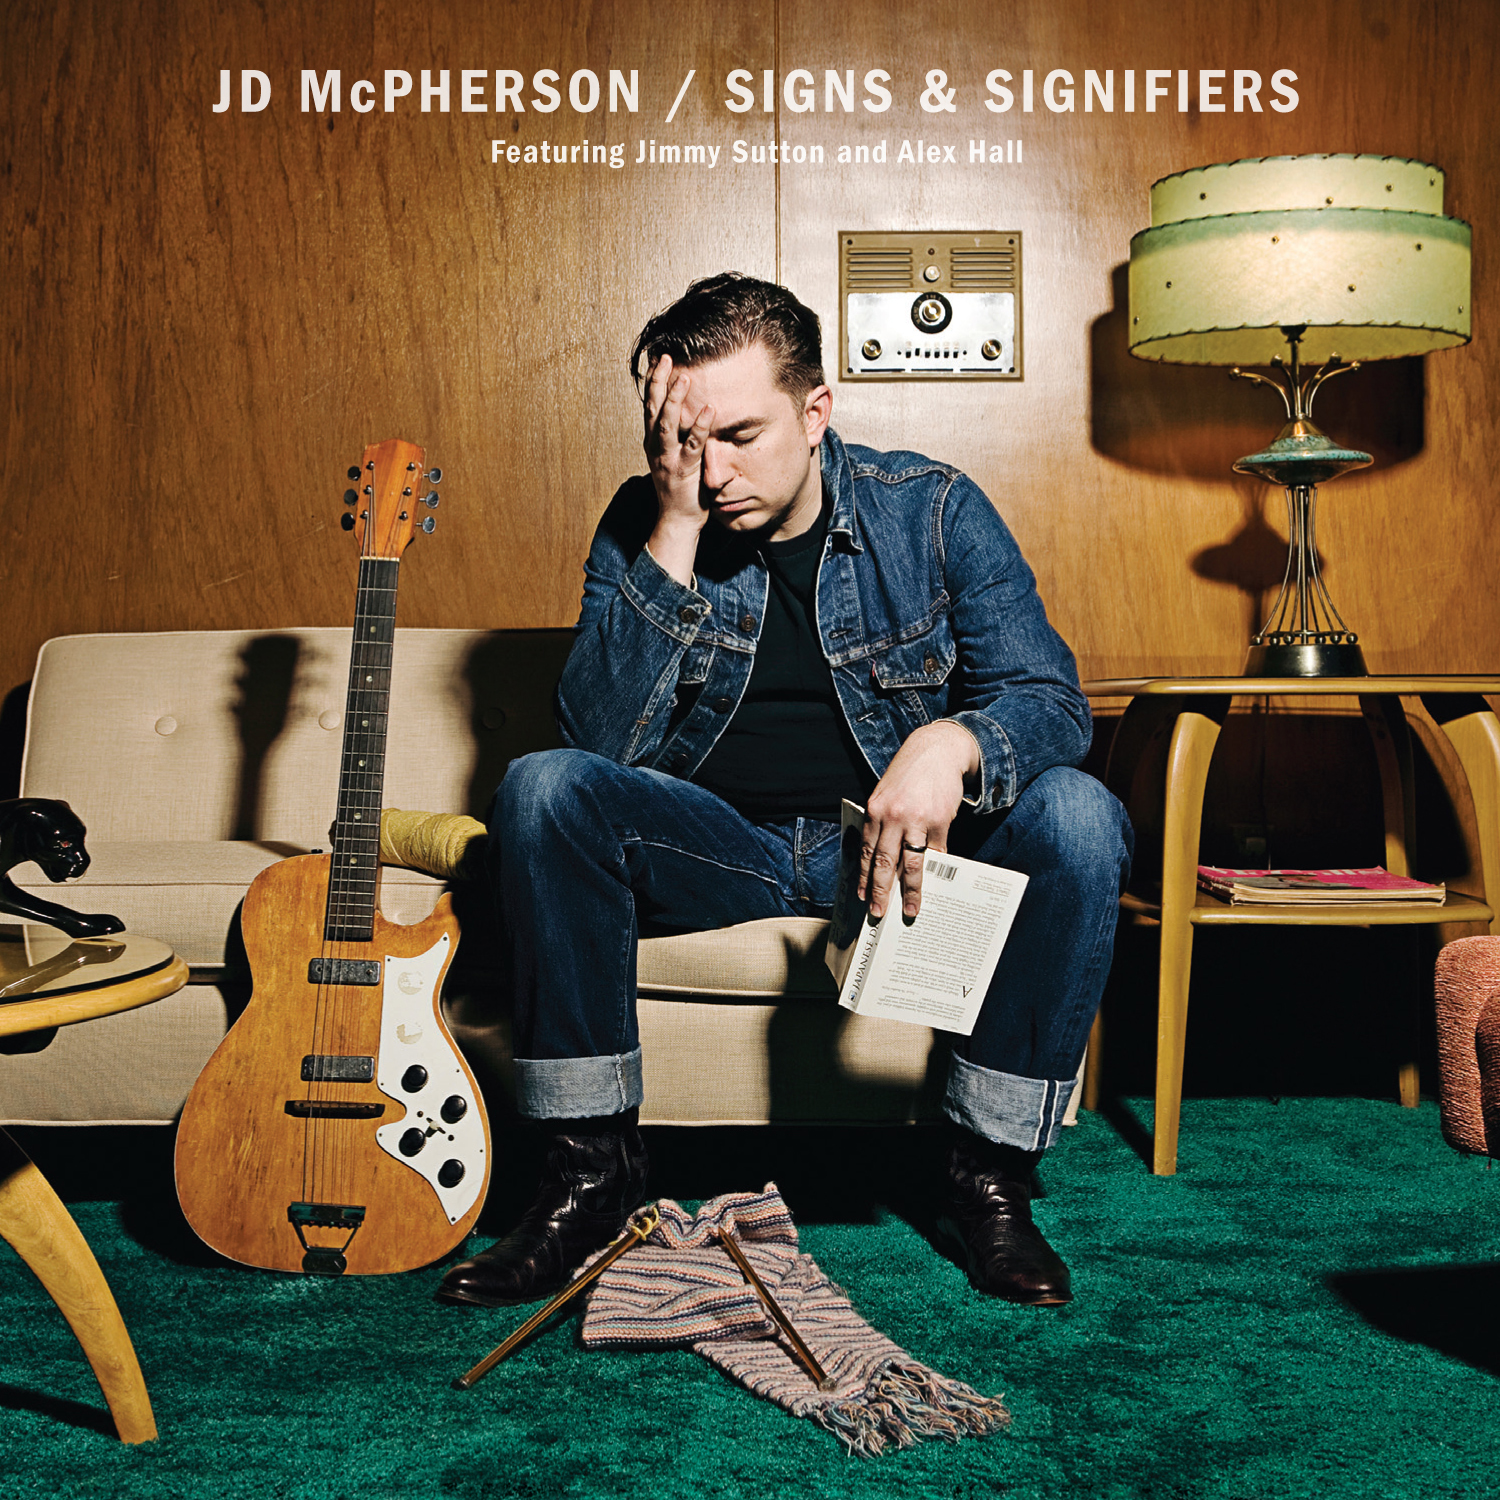 JD McPherson at Bergenfest this weekend